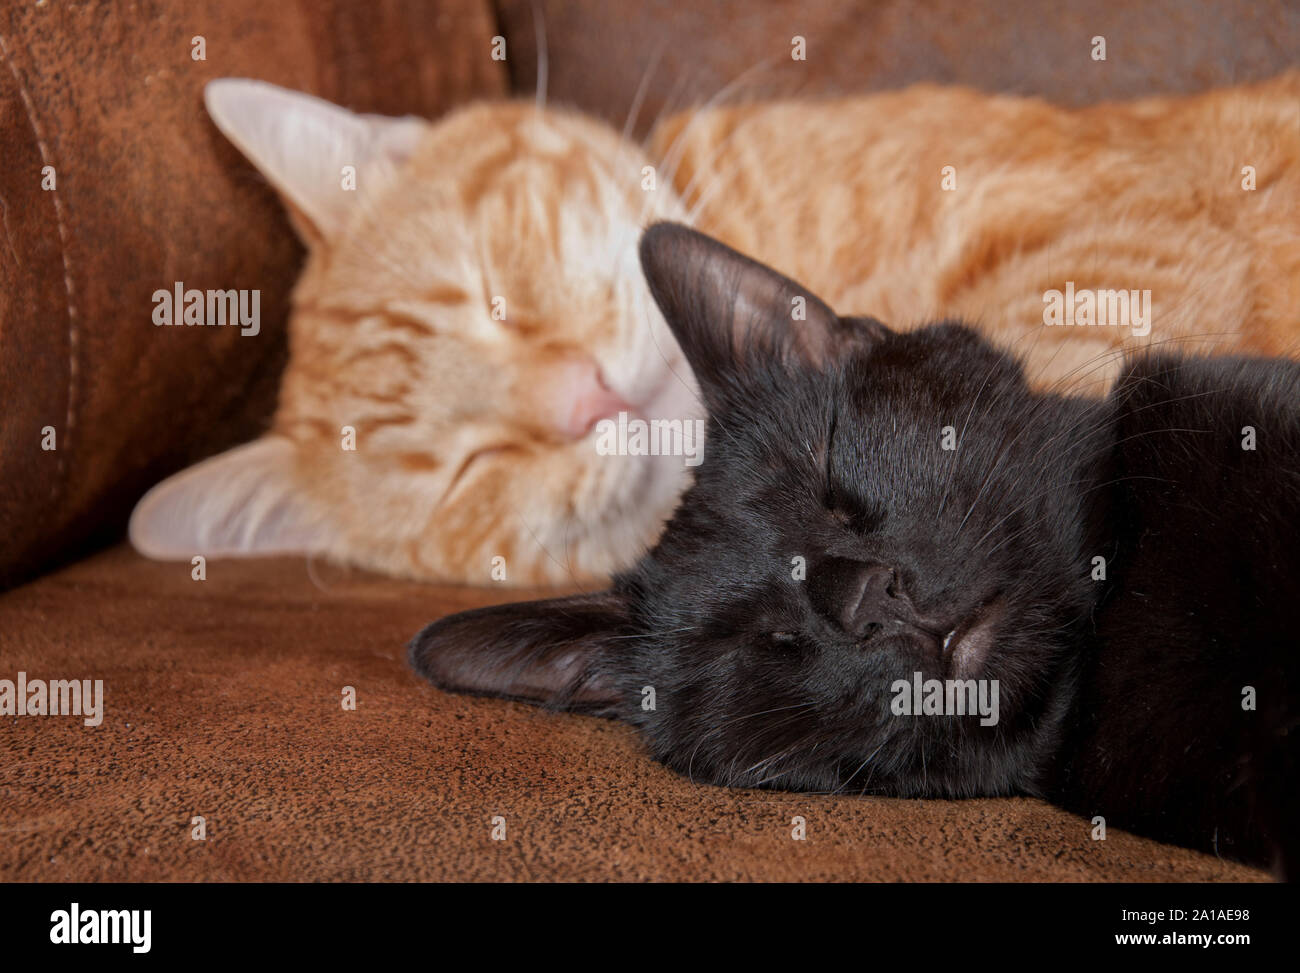 Small black cat sleeping on couch with a ginger cat on background Stock Photo